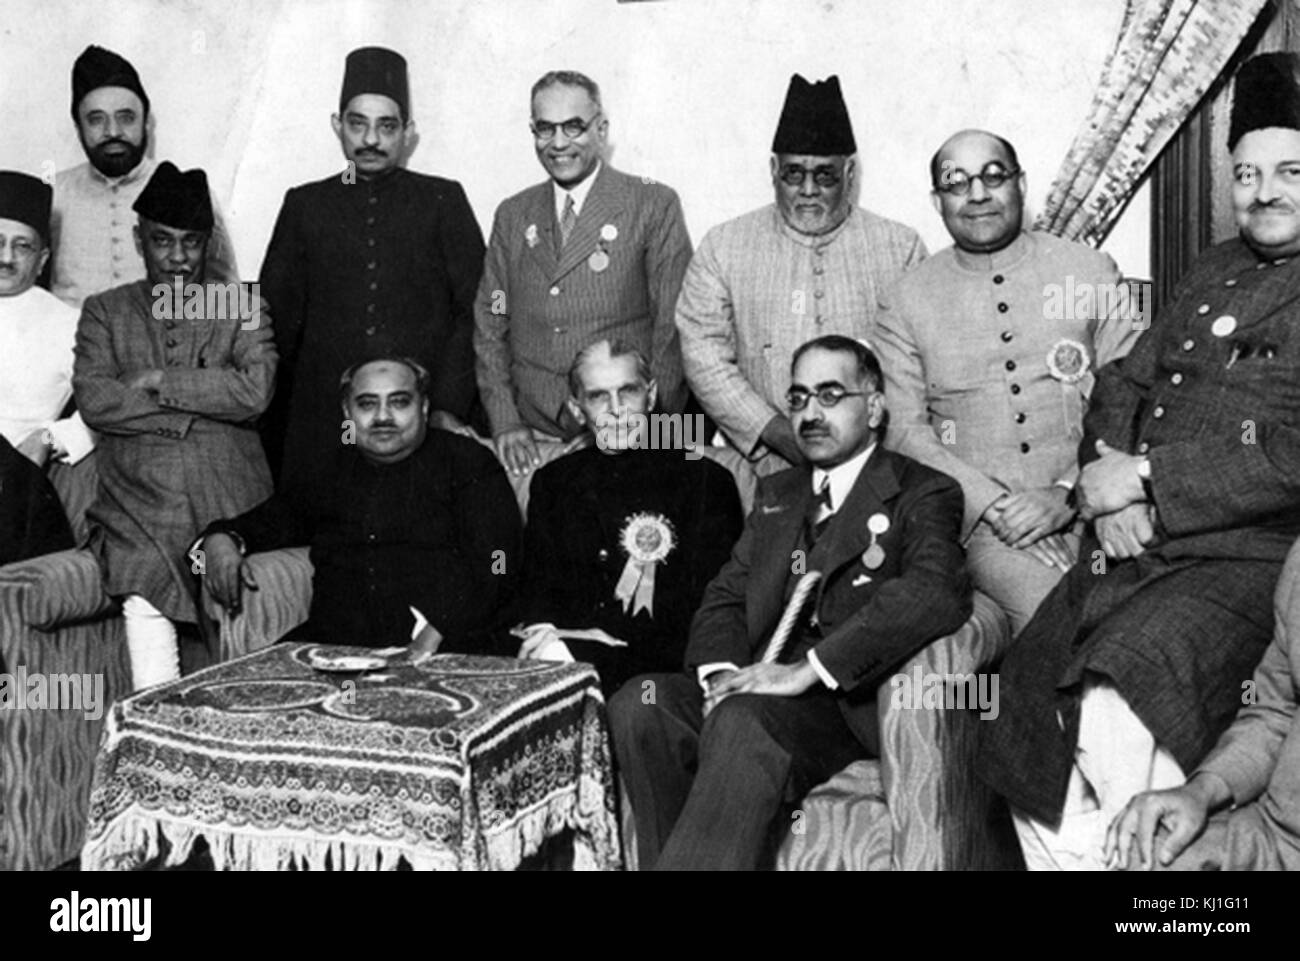 Pakistani leaders 1947: Mohammed Ali Jinnah (center); Sir Sikander Hayat Khan (right), Sir Nizam-ud-Din (left) with Liaquat Ali Khan (back row, second from right). Stock Photo